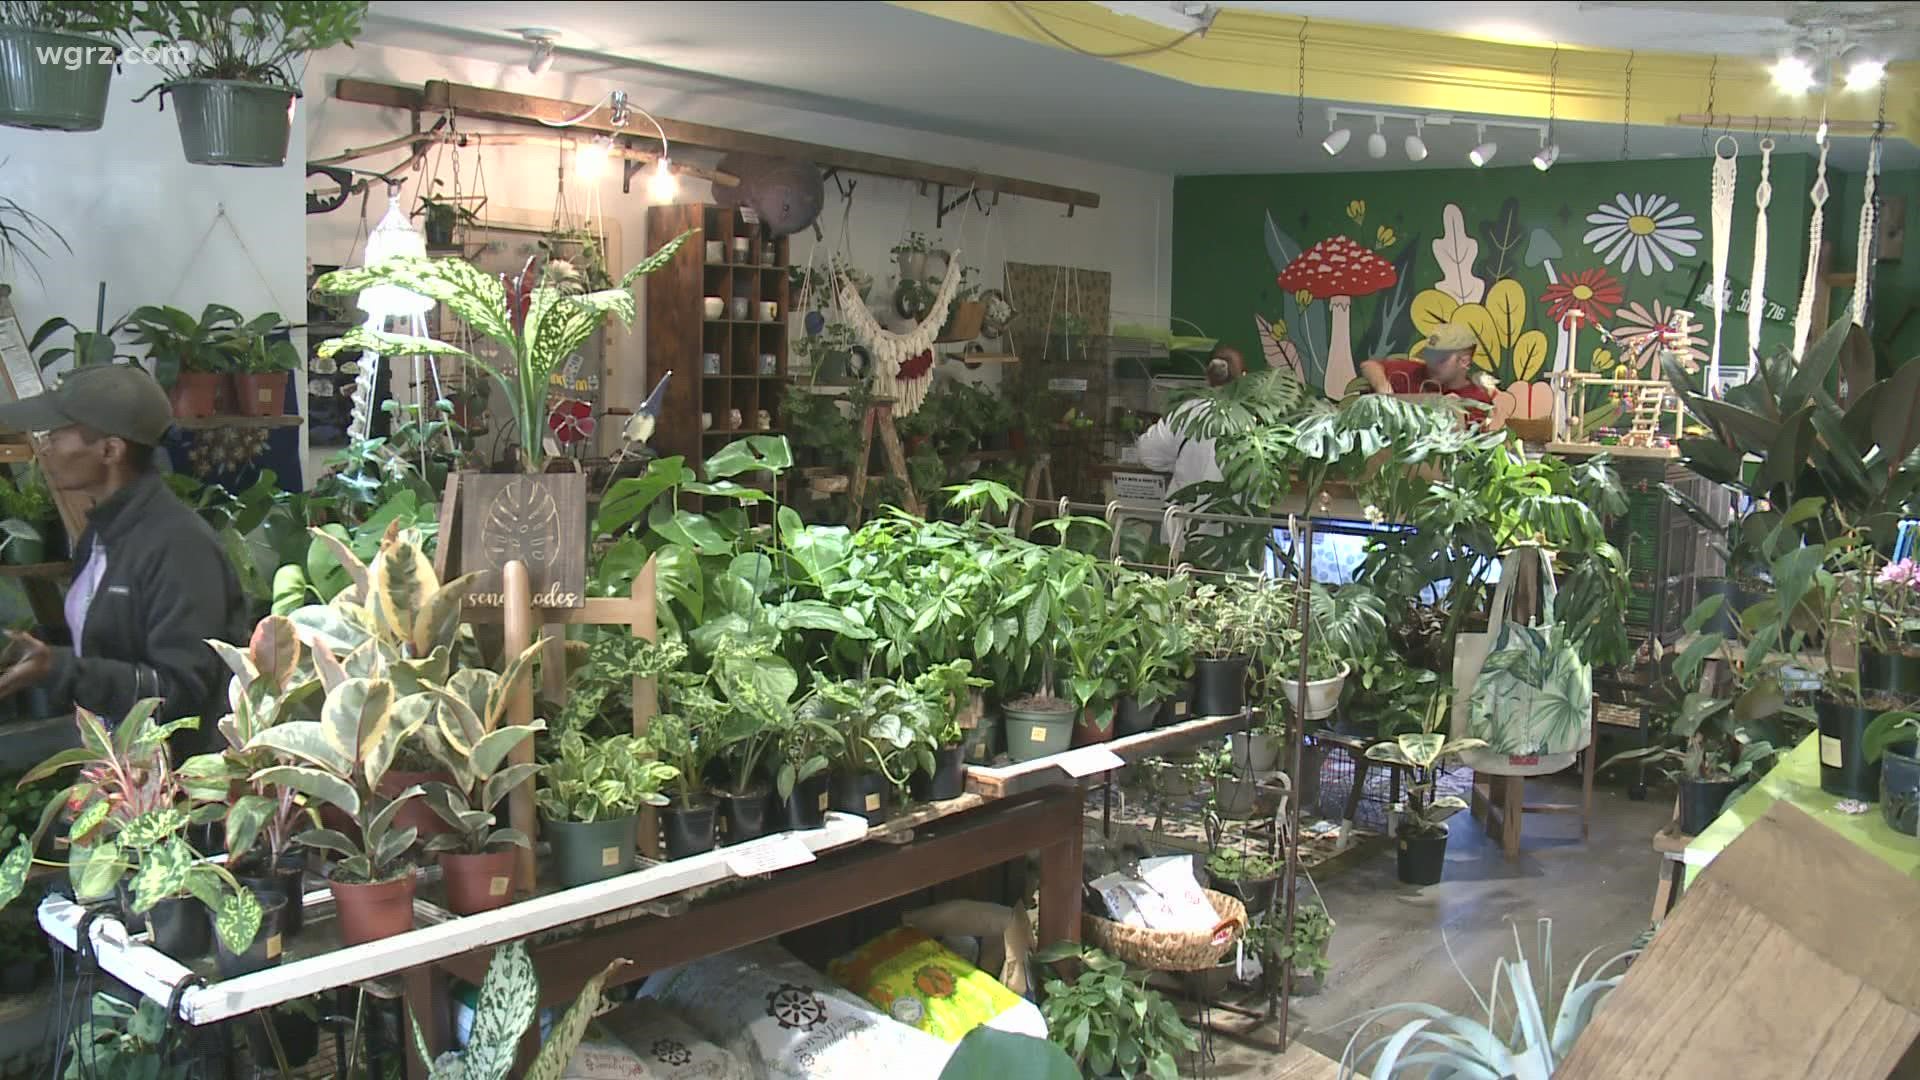 The International Institute reached out to a business called "Put a Plant On It" and the result was a unique sale.